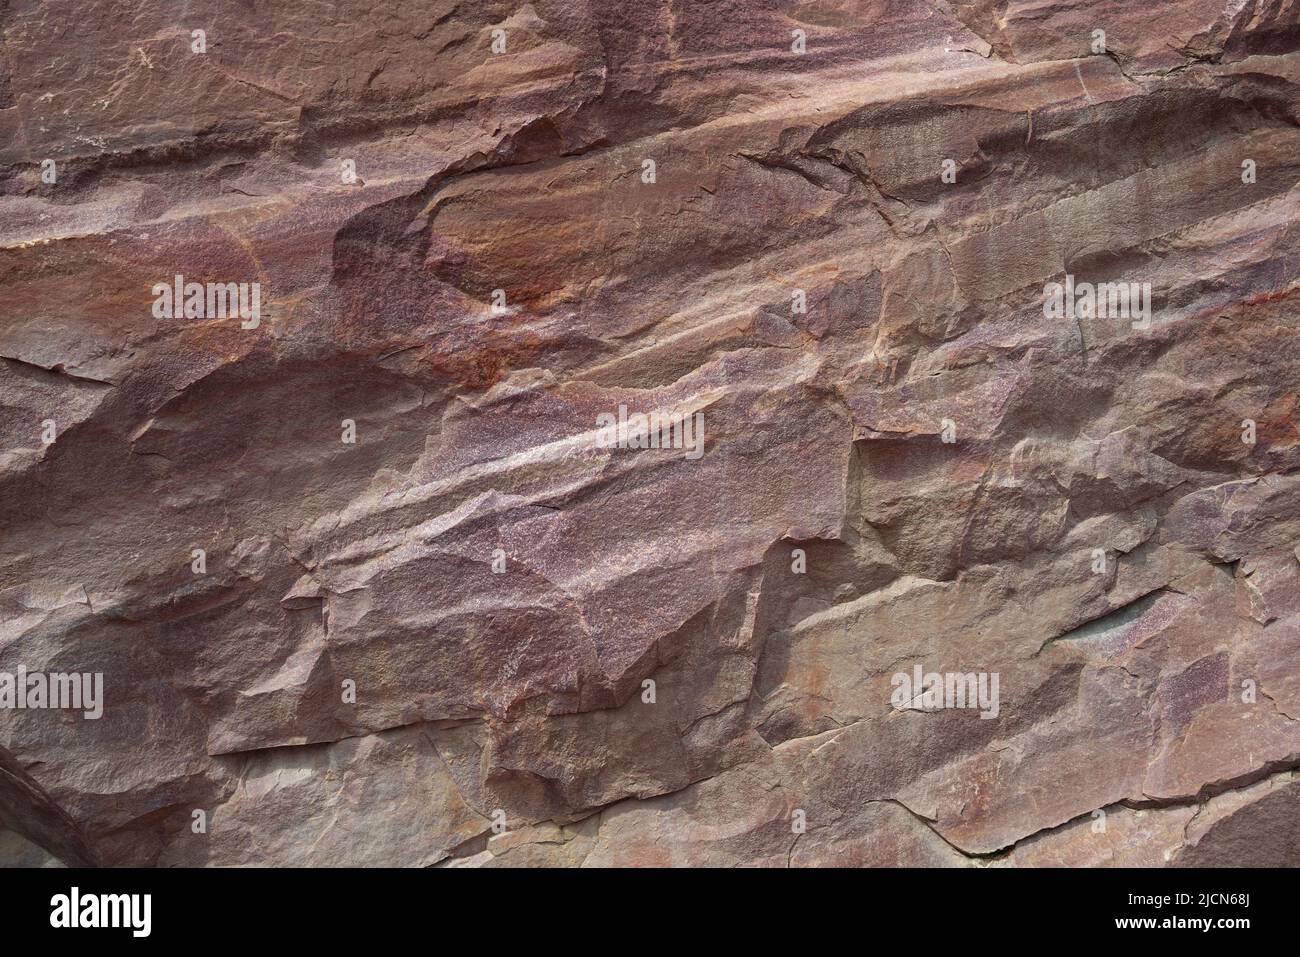 Mineral stone raspberry quartzite close-up in section Stock Photo